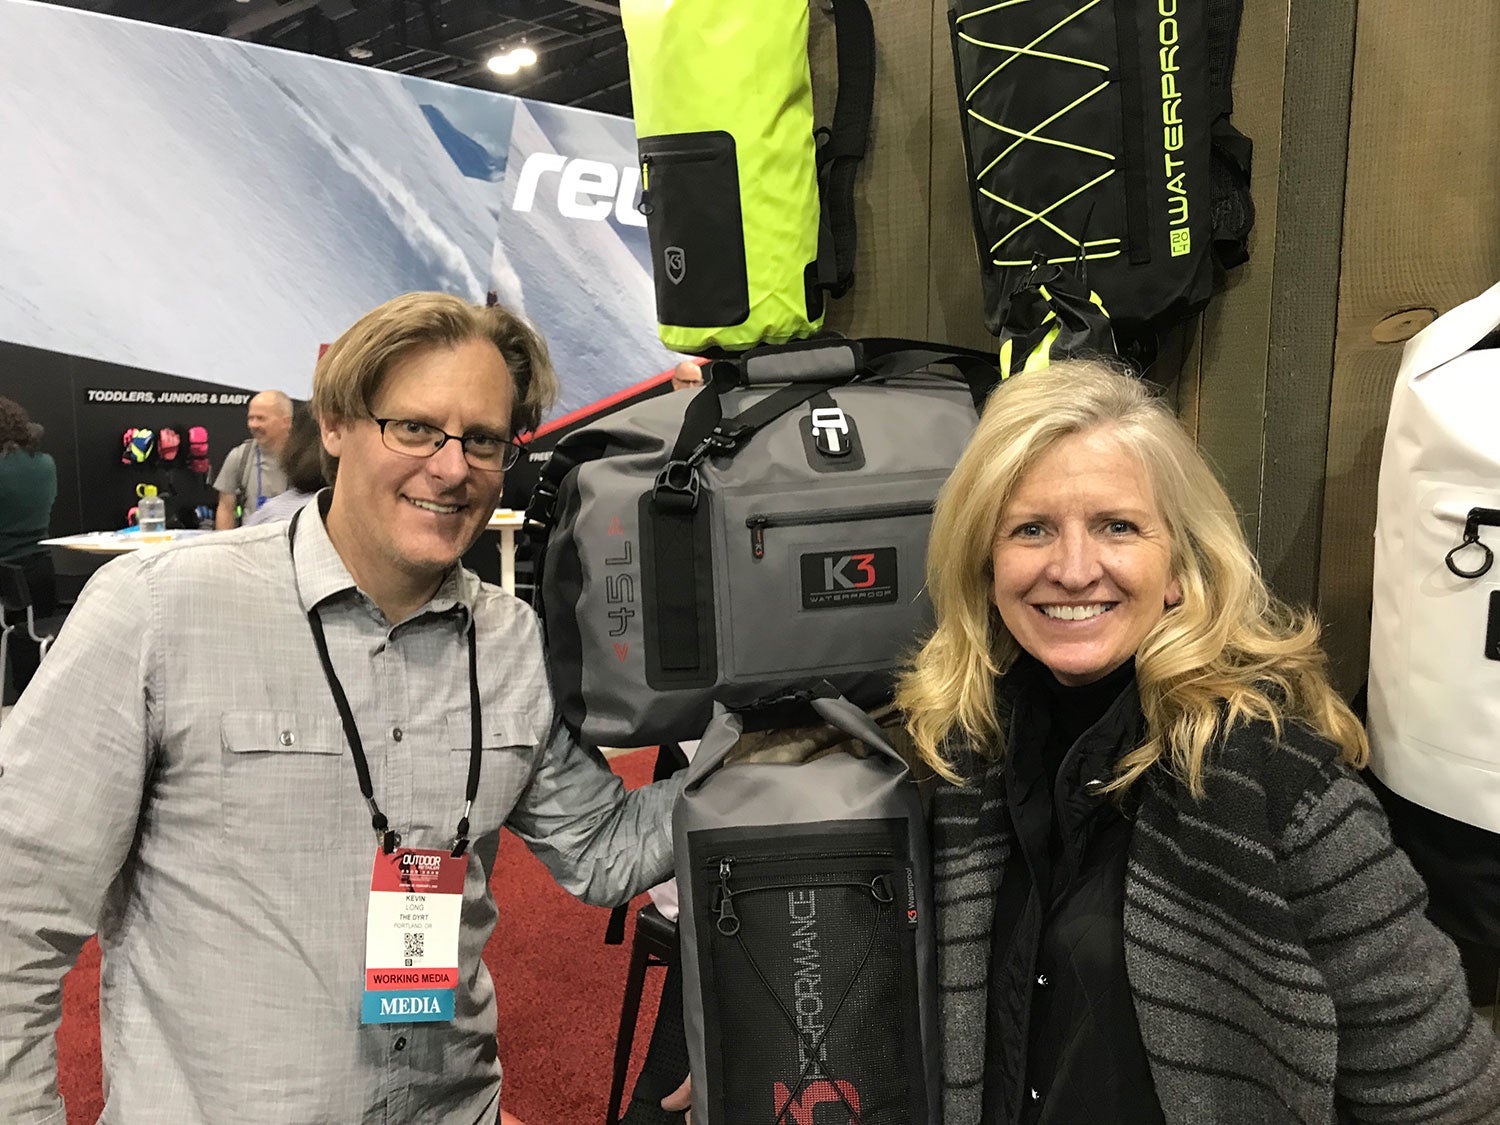 man and woman posing for photo with waterproof duffel bag at outdoor retailer booth